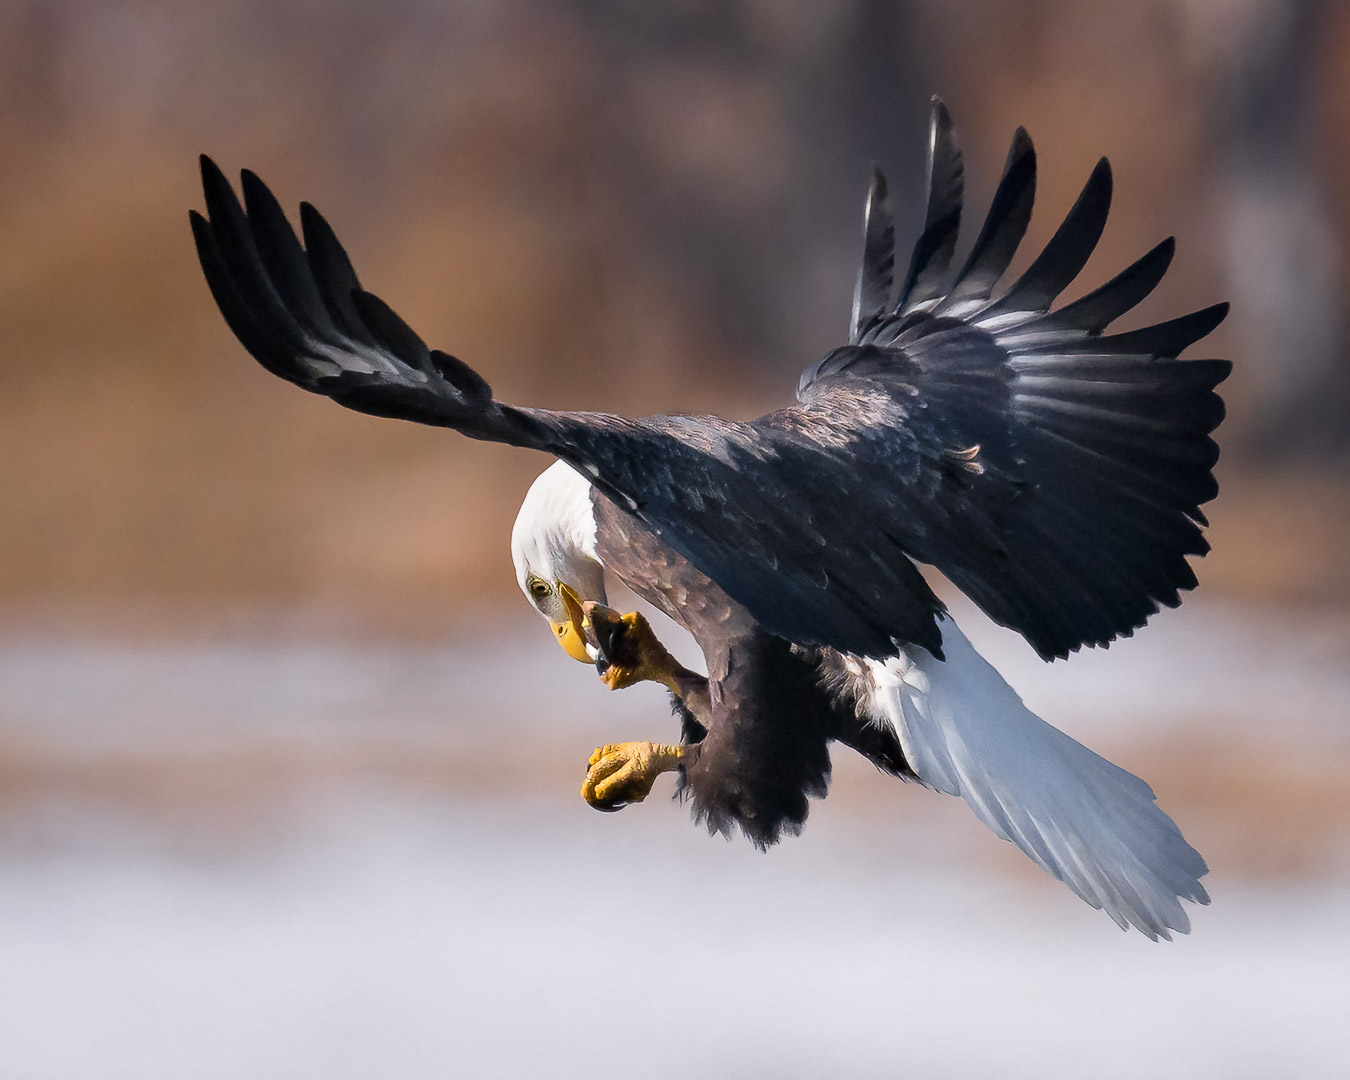 American Bald Eagle eating fish while flying